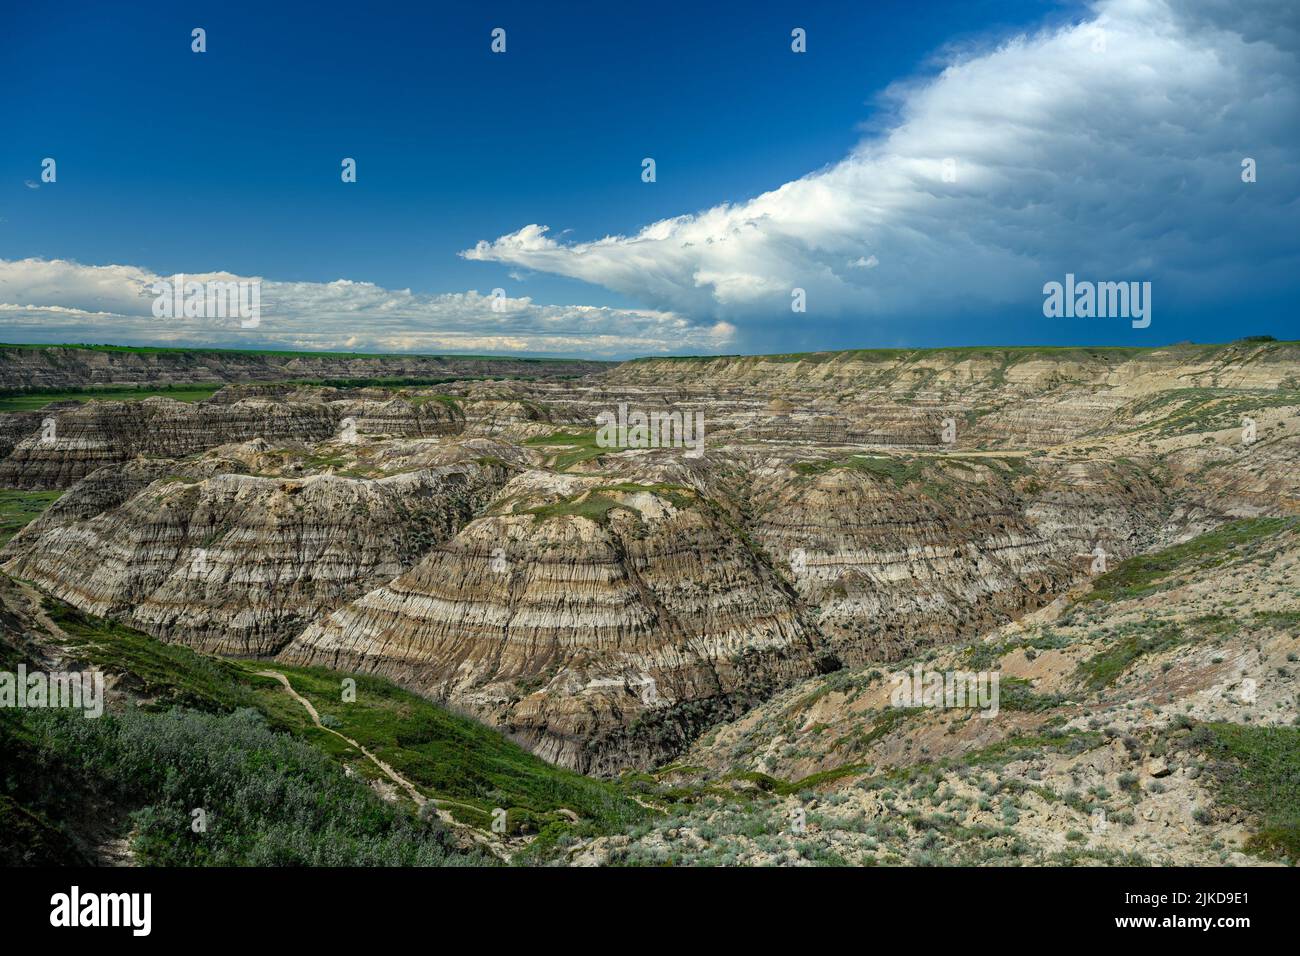 Horsethief Canyon in the Red Deer River Valley, Canadian Badlands on the North Dinosaur Trail, Drumheller, Alberta, Canada. Stock Photo